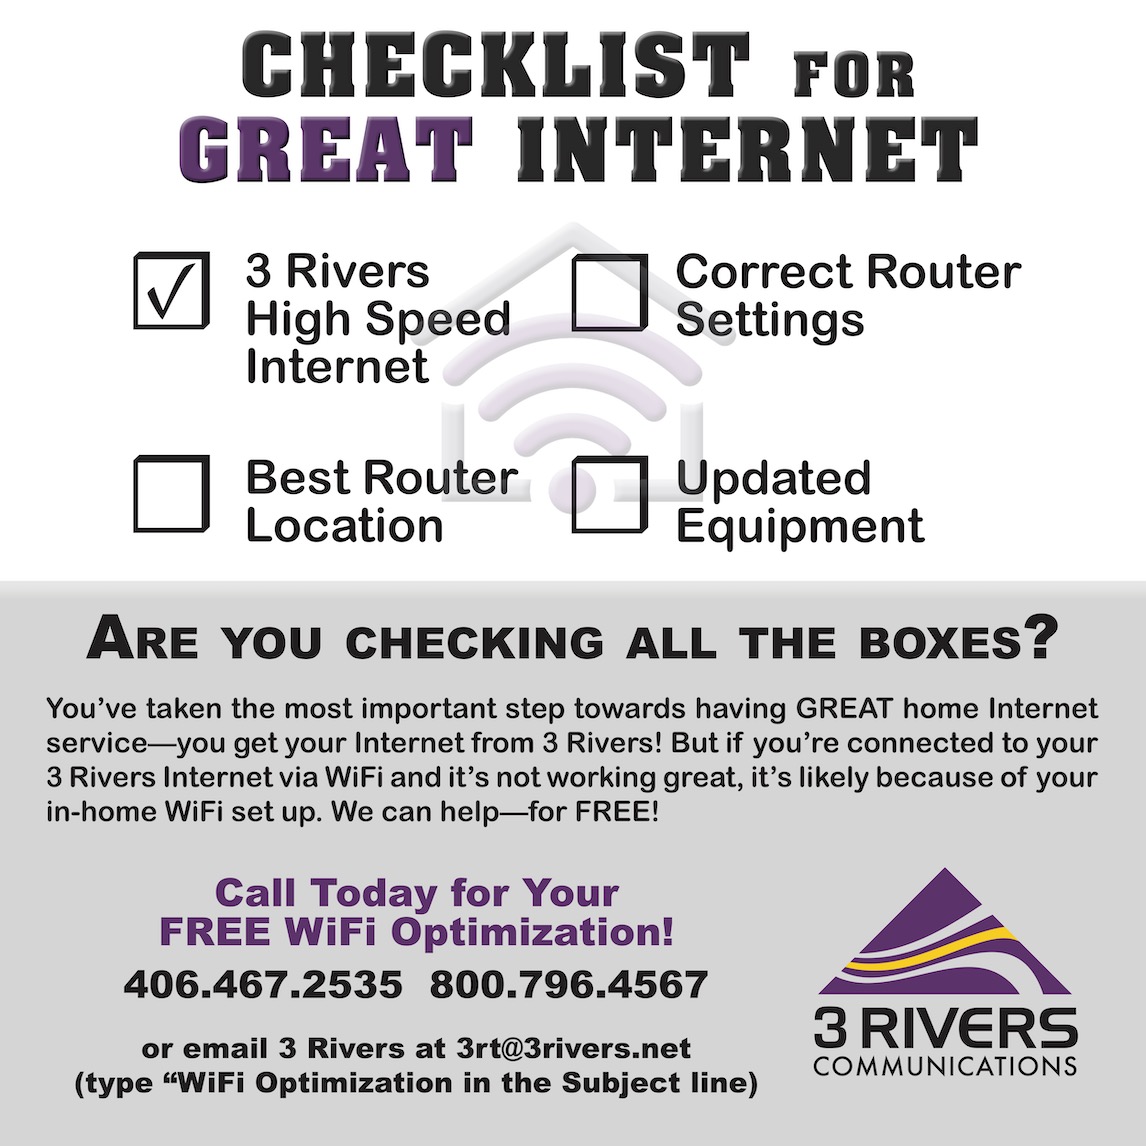 Checklist for Great Internet - Download Graphics to View